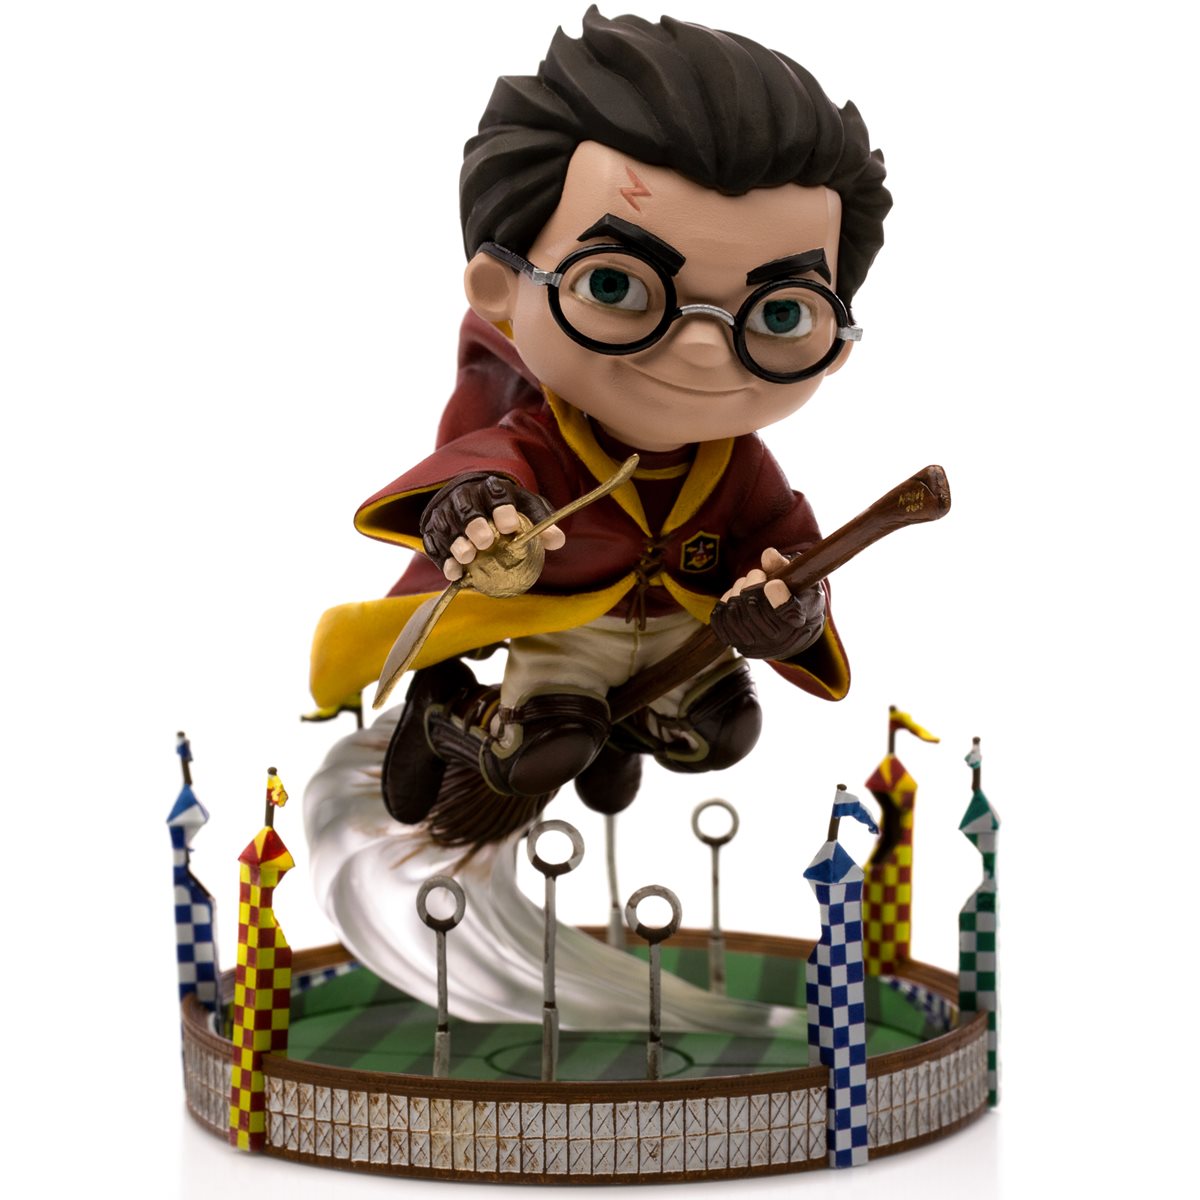 MiniCo. Vinyl Figure: Harry Potter at the Quidditch Match